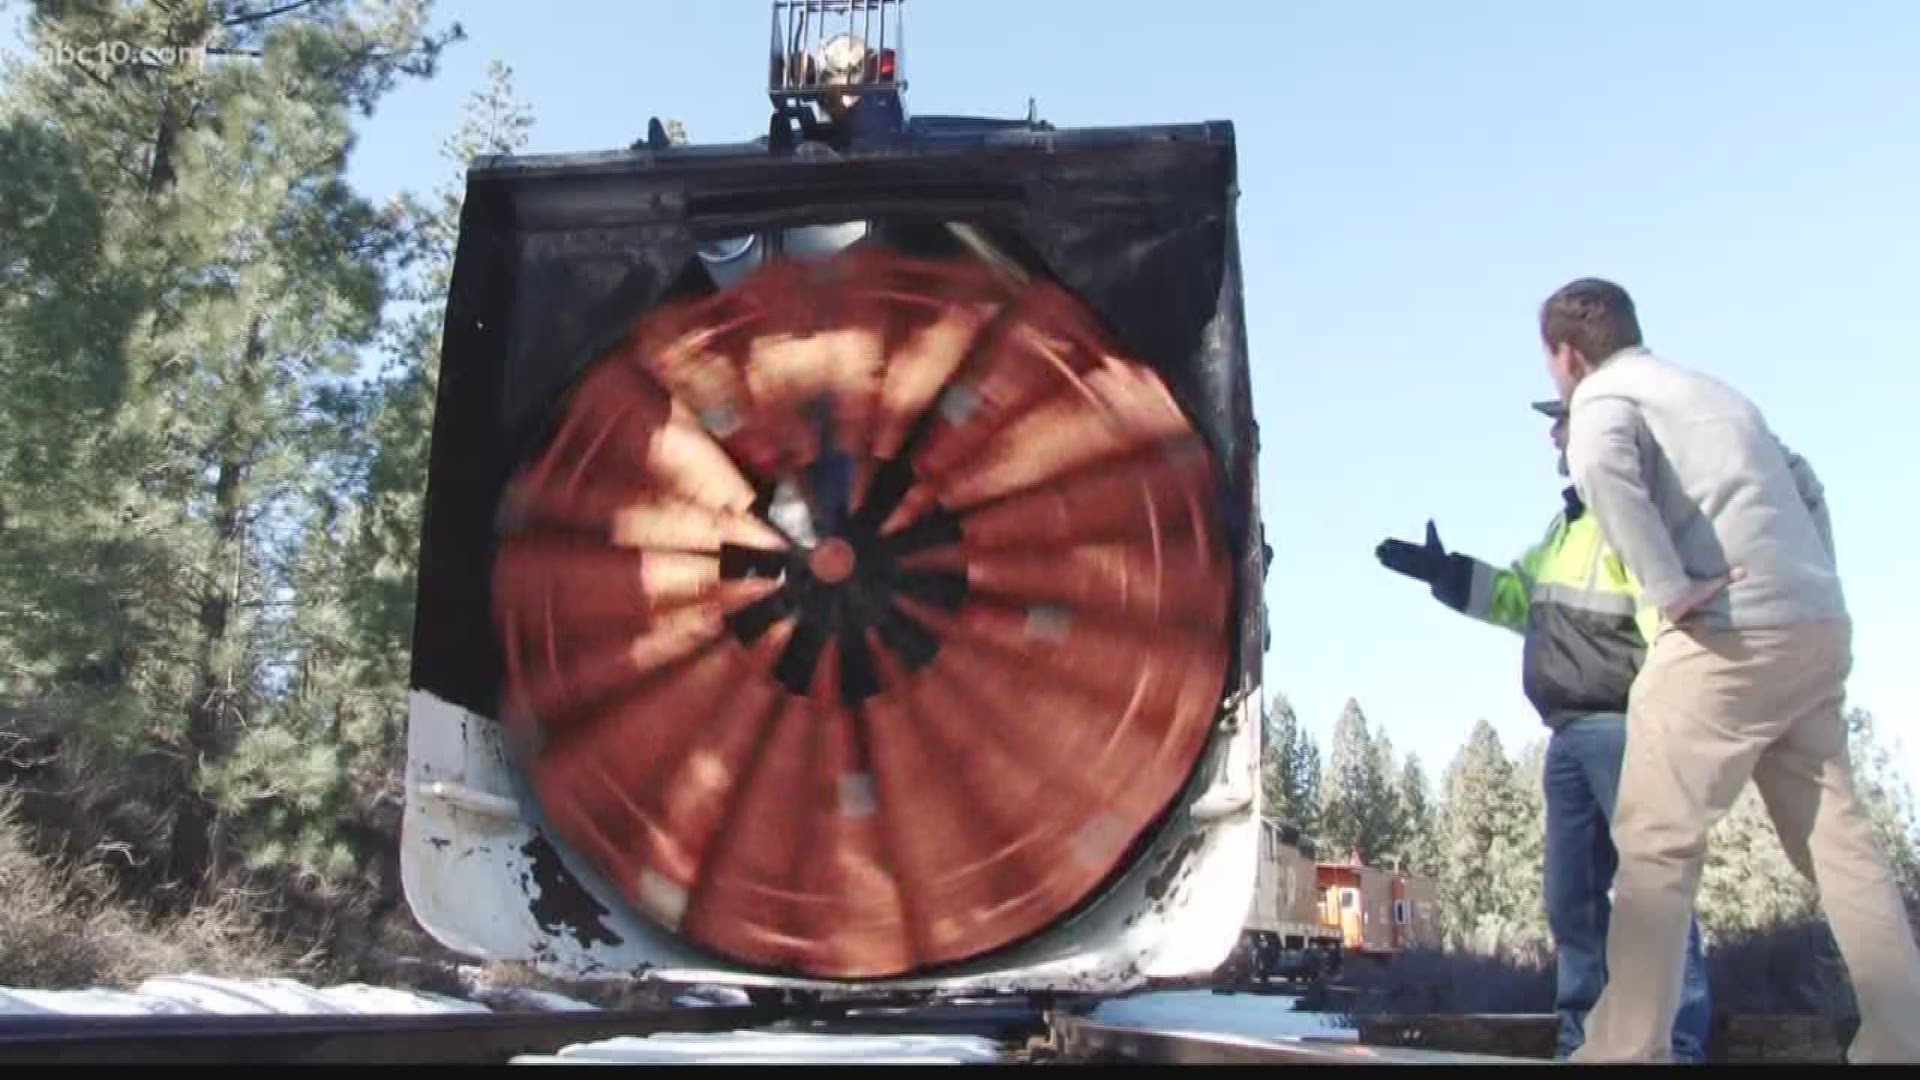 The Rotary snow plow plays a crucial part in removing snow in the Sierra. (April 2, 2018)